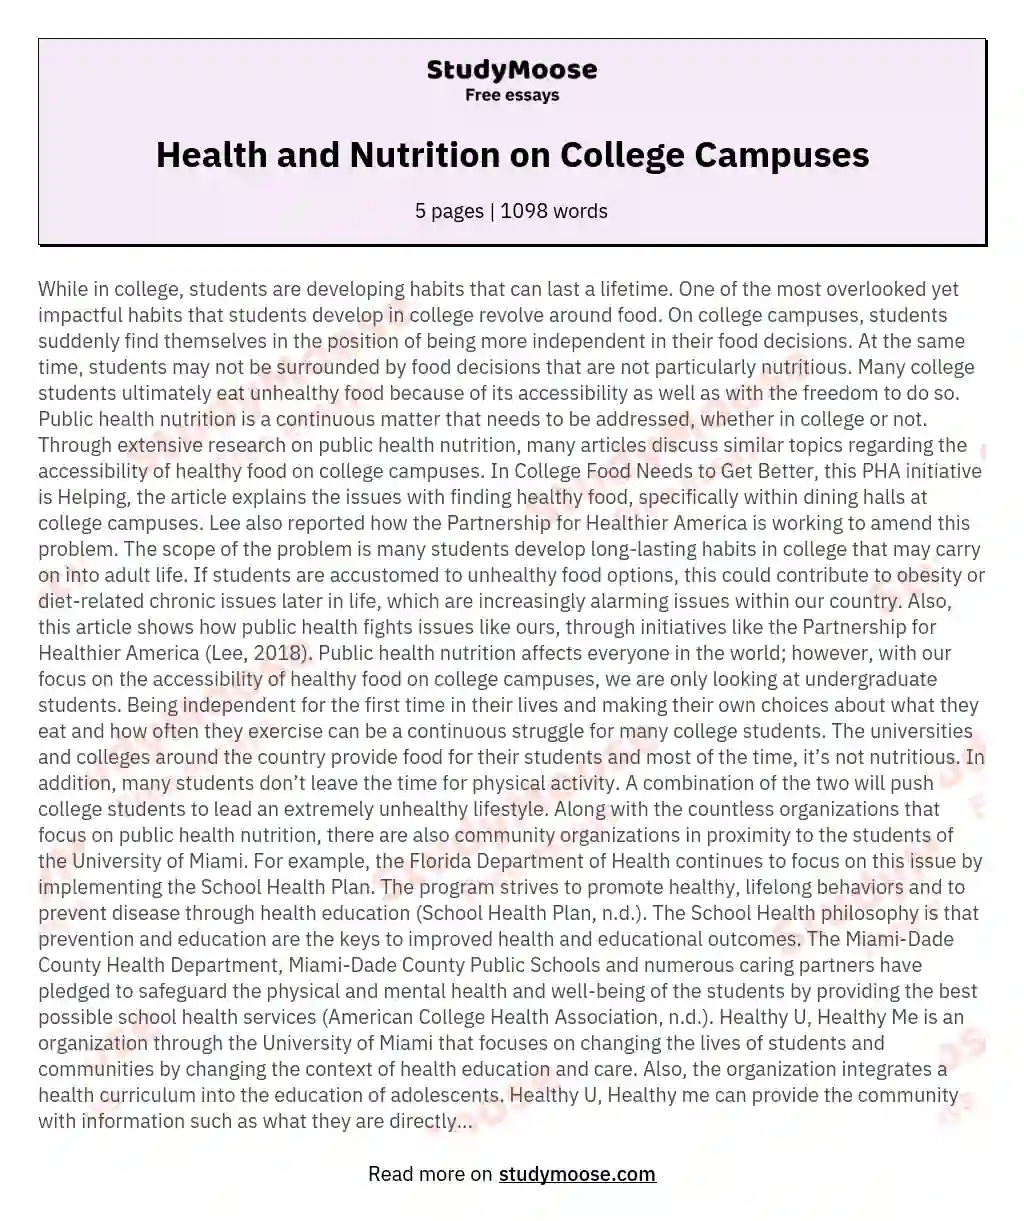 Health and Nutrition on College Campuses essay